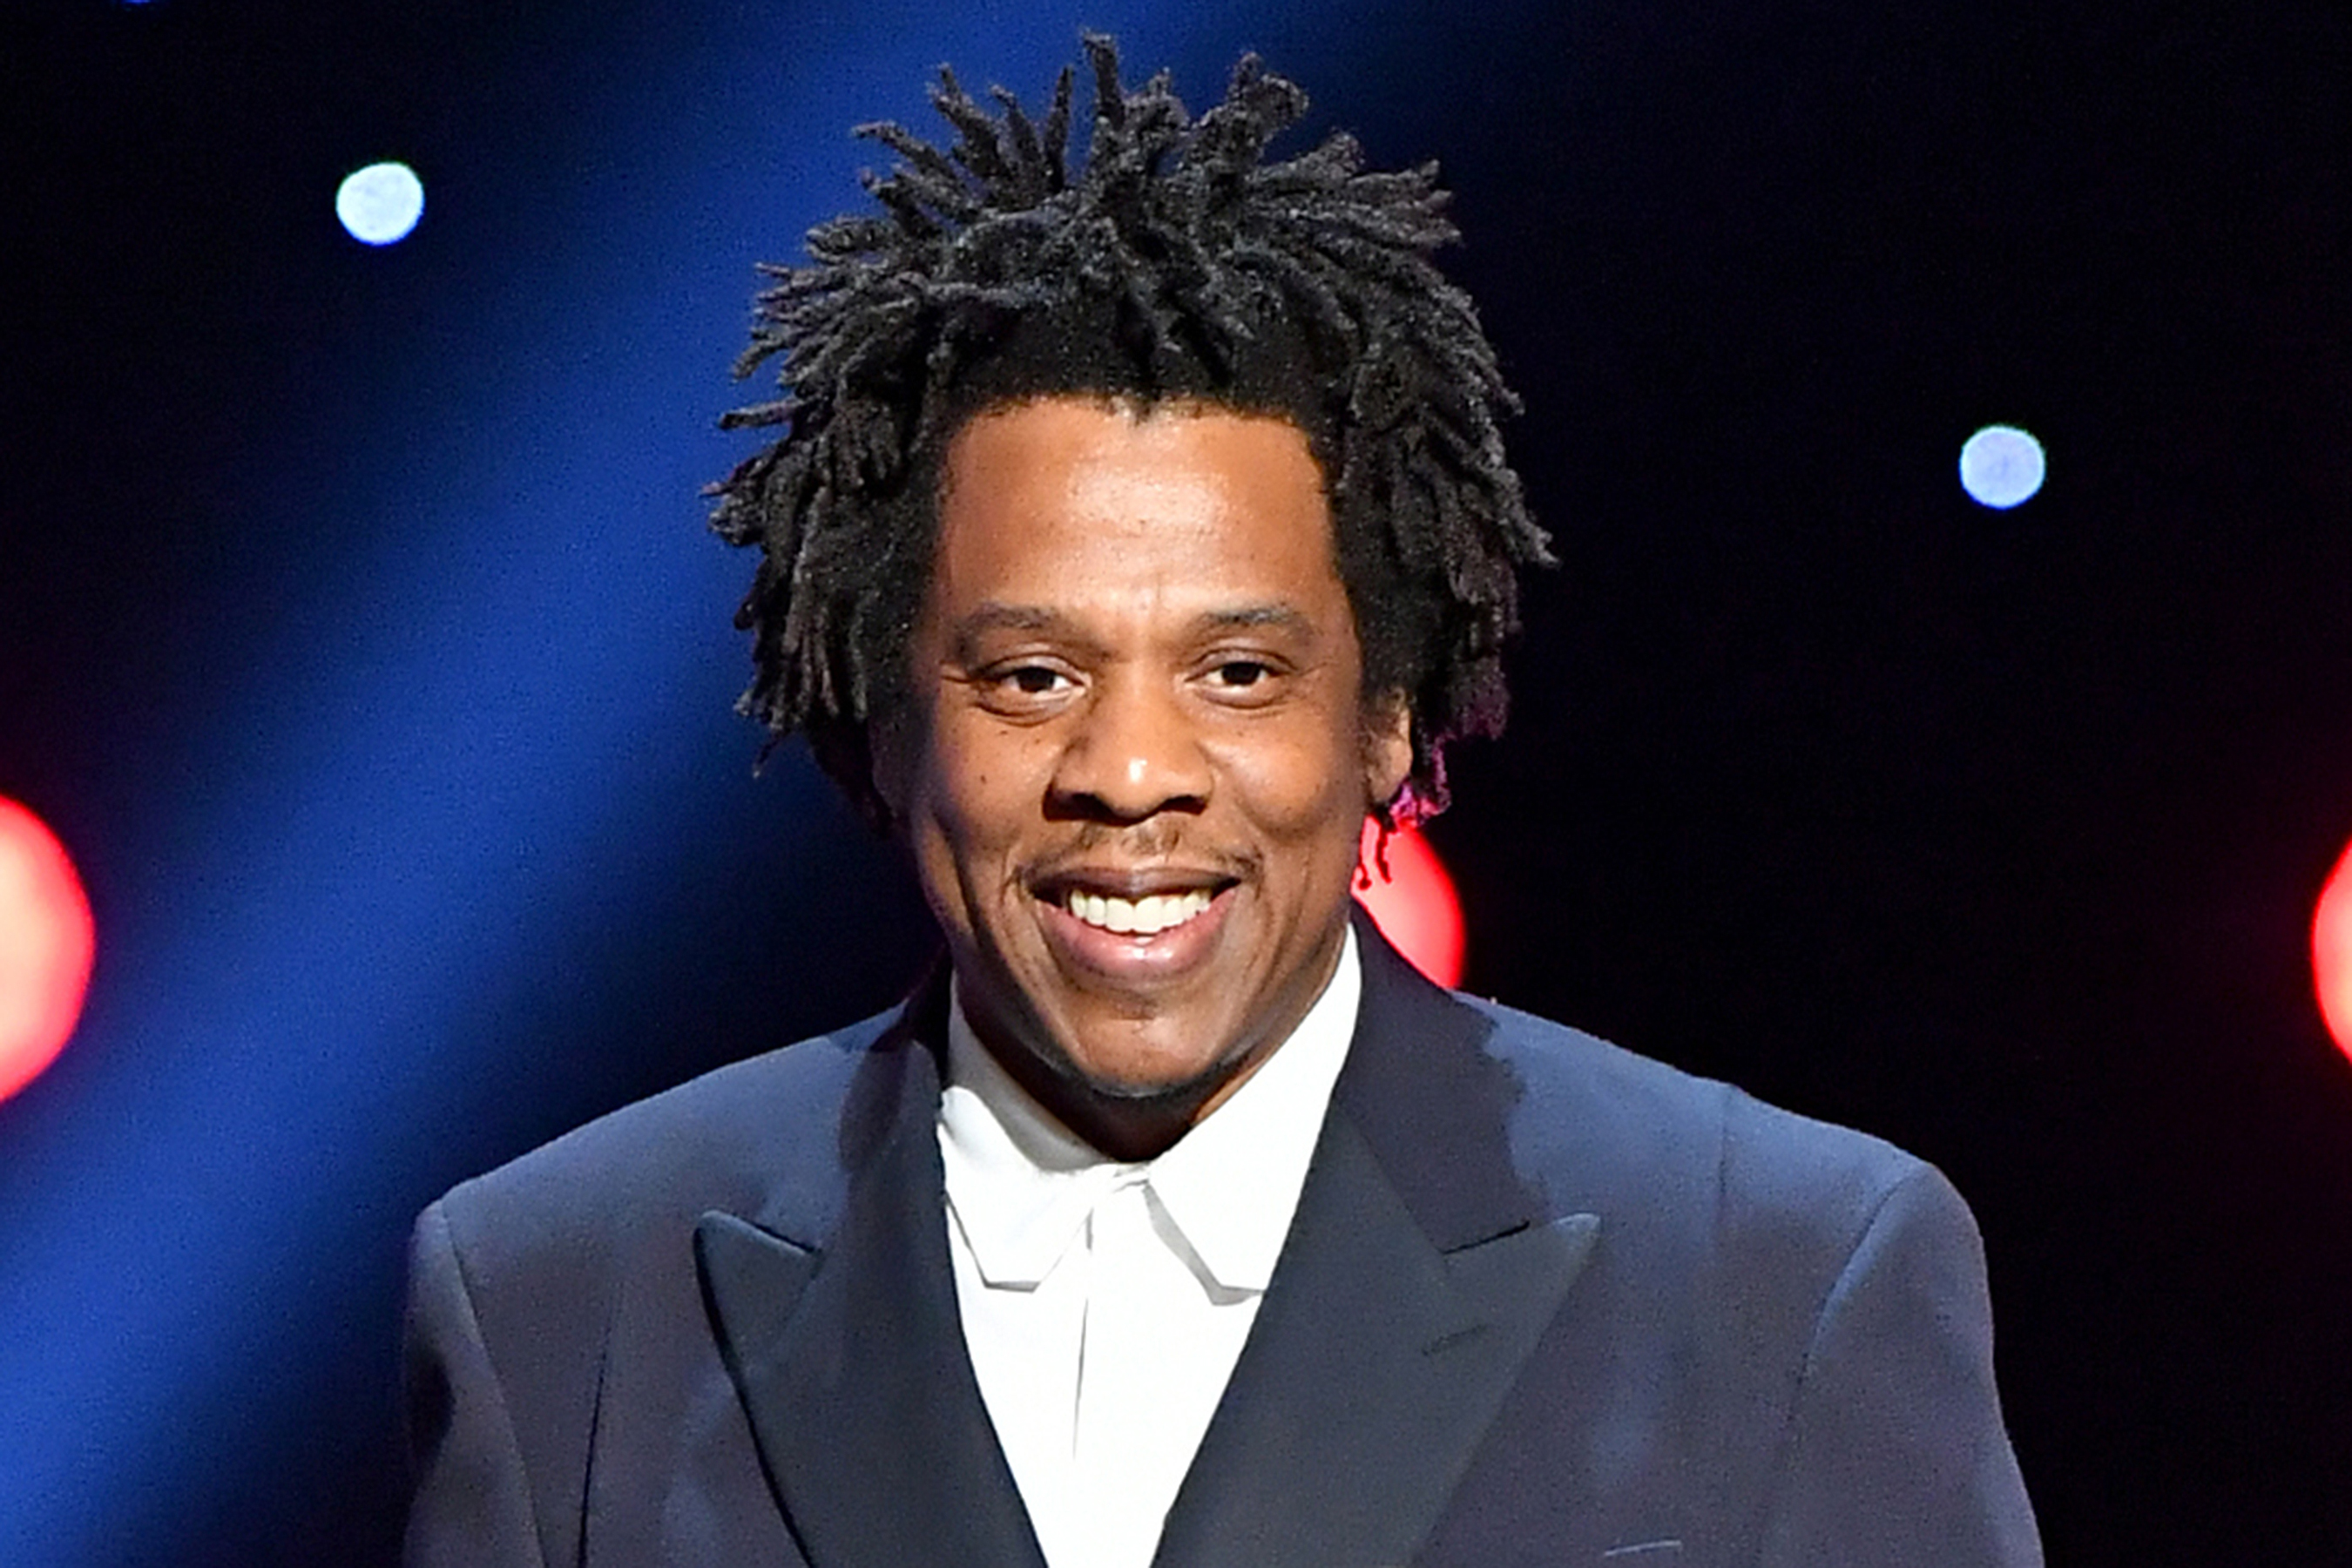  Jay-Z @ Getty Images